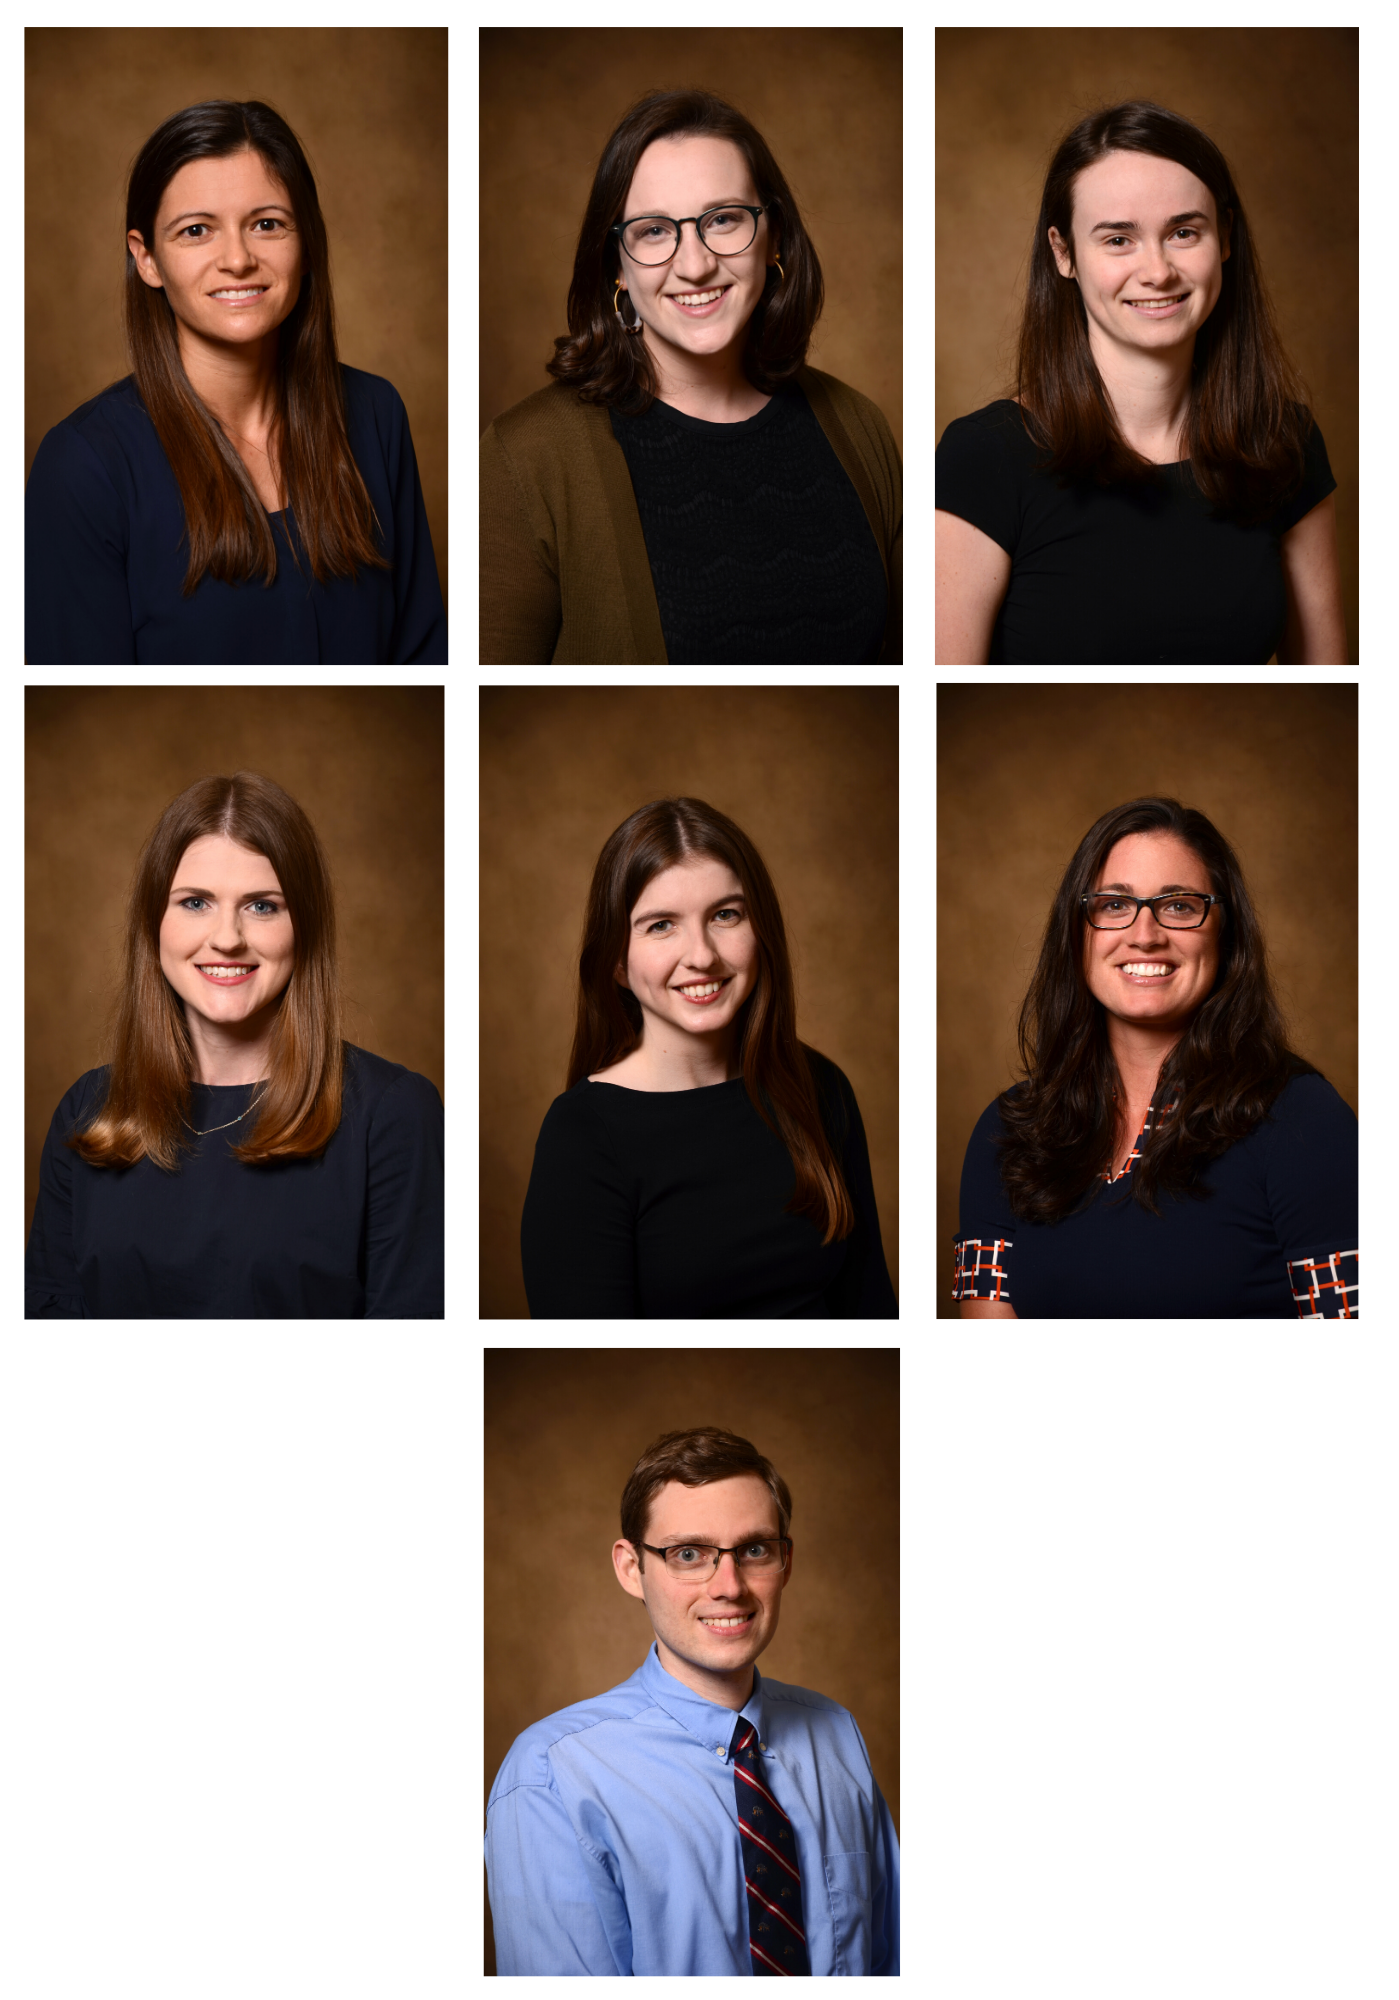 2020 PGY1s Collage 2